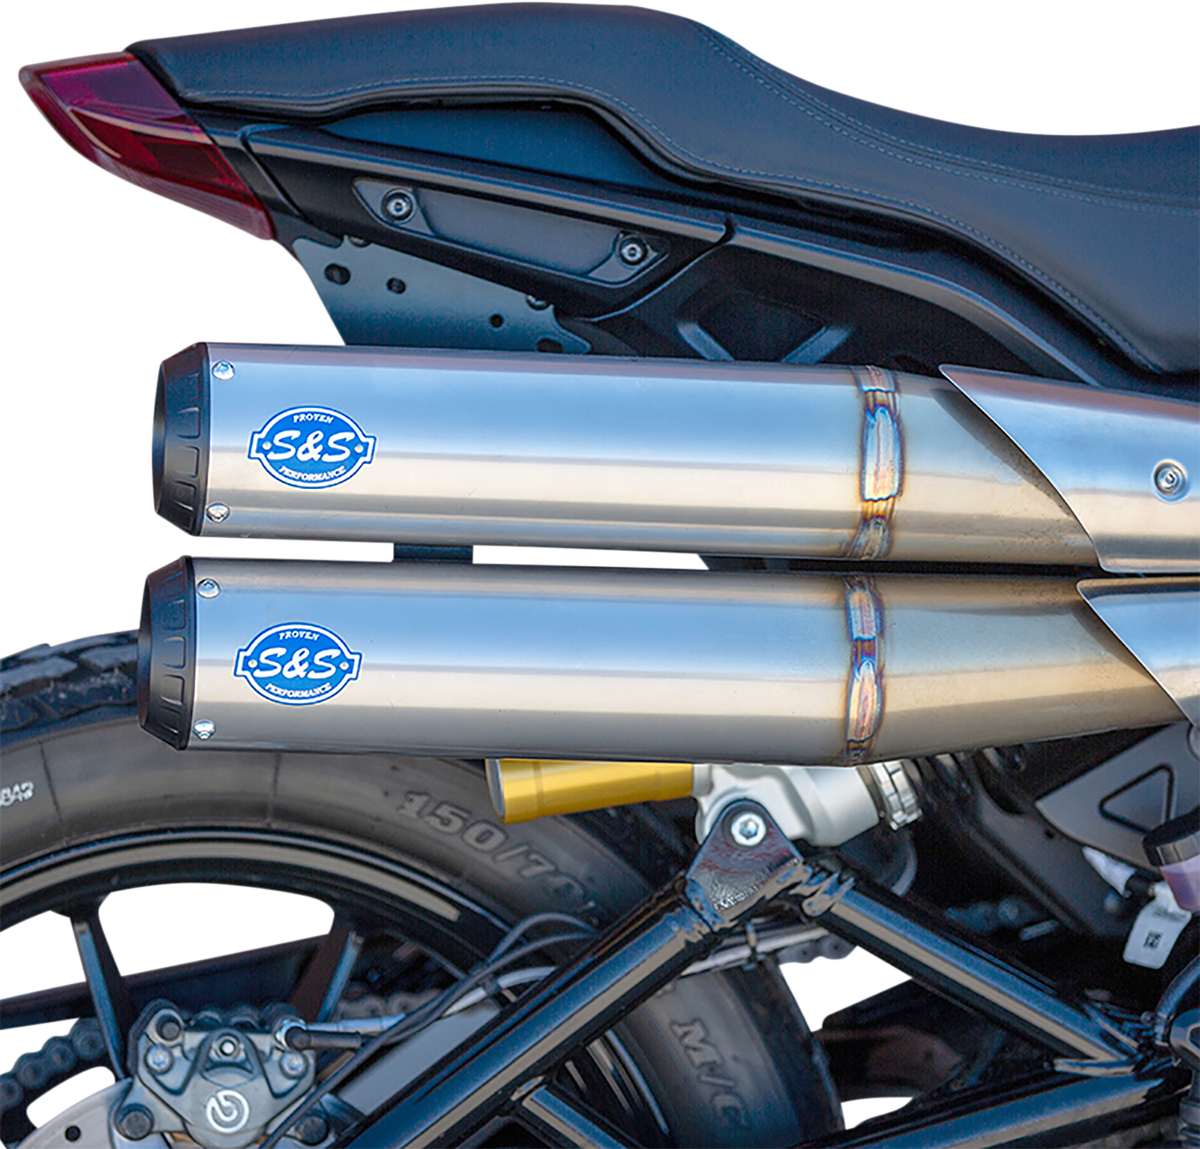 S&S CYCLE Grand National 2:2 50 State Exhaust - Stainless Steel 550-0950B